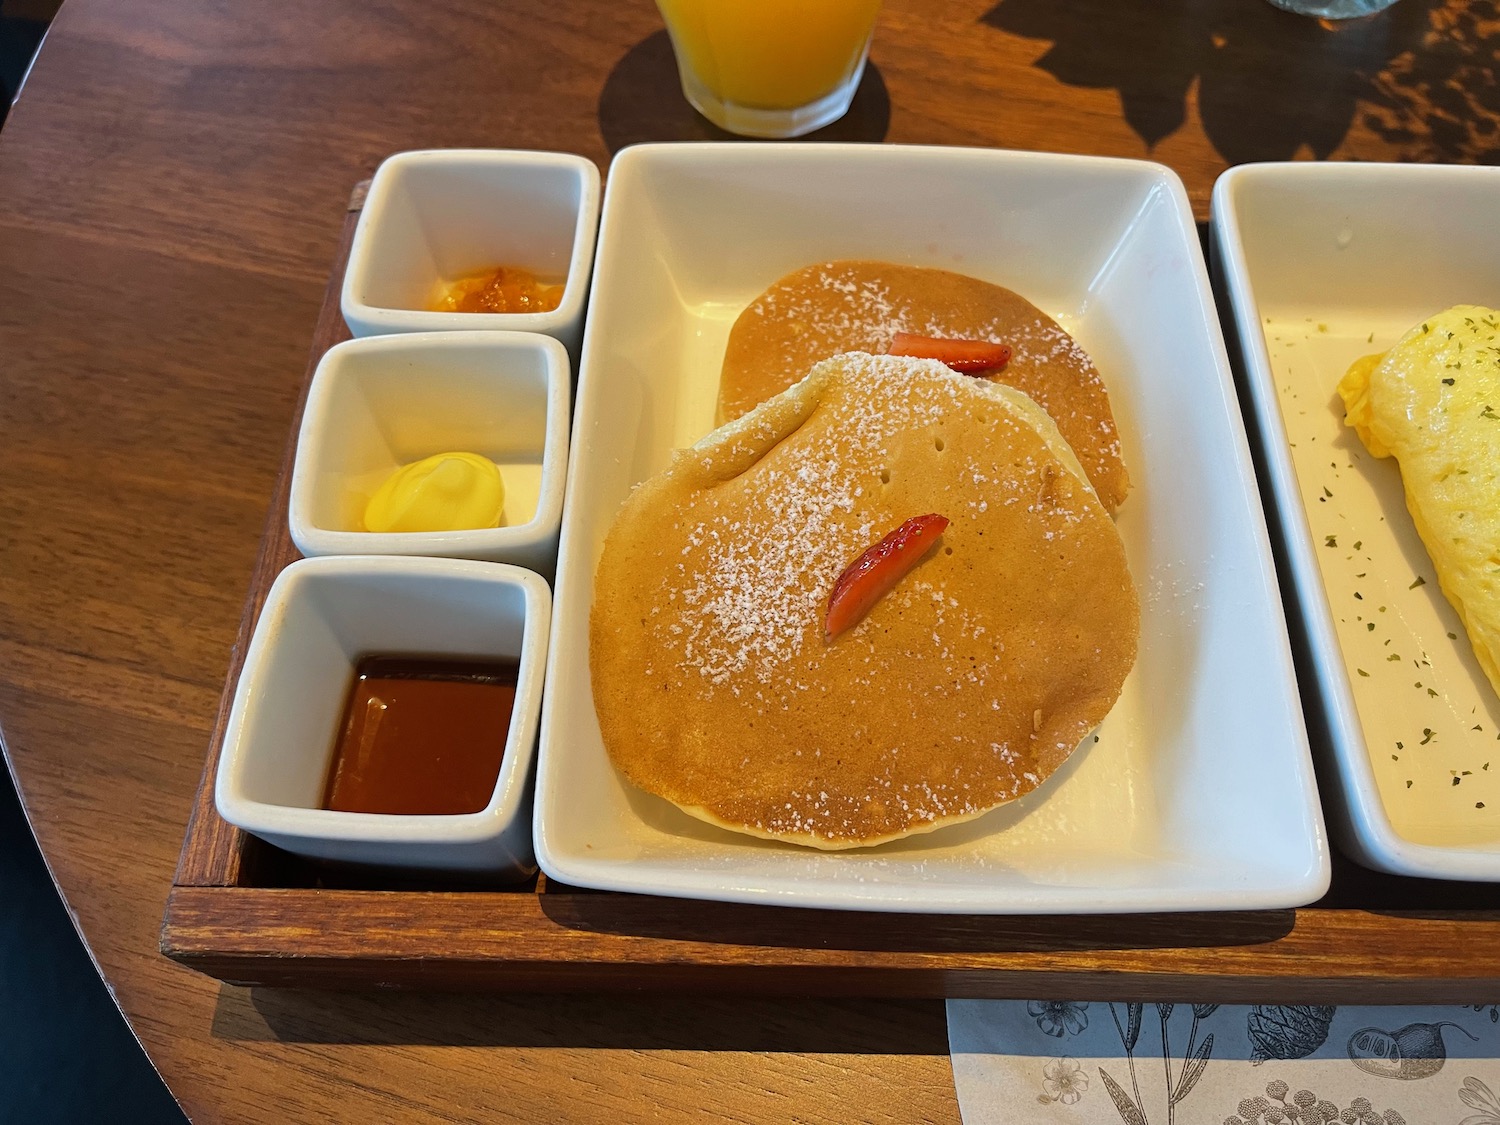 a plate of pancakes with sauces and a glass of juice